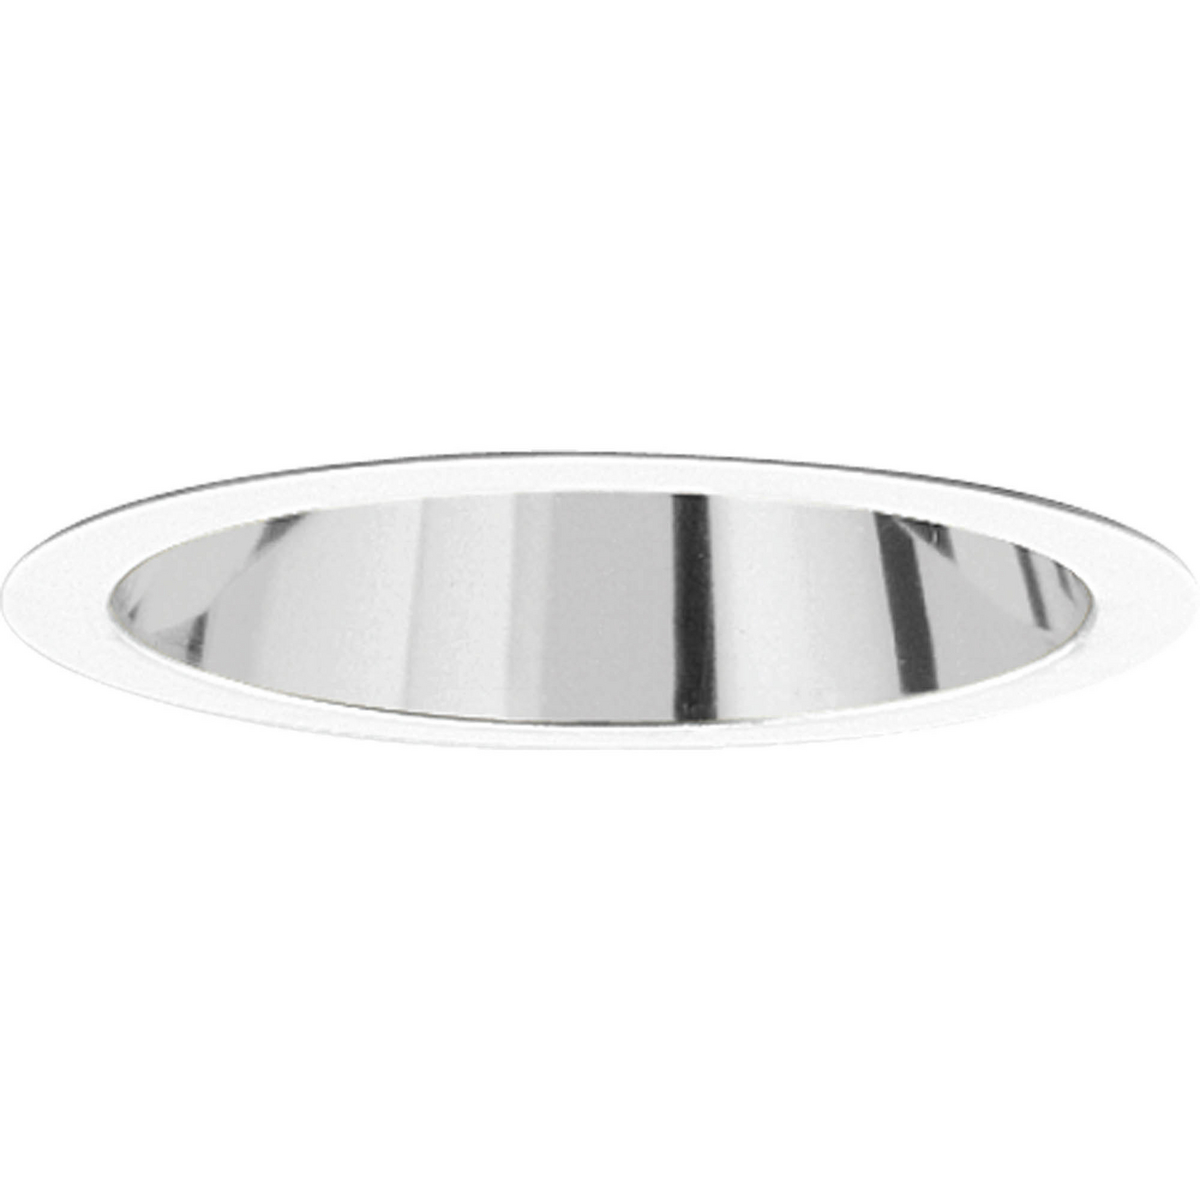 Clear Alzak Cone recessed trim for use with insulated ceilings. 7-3/4 in outside diameter.